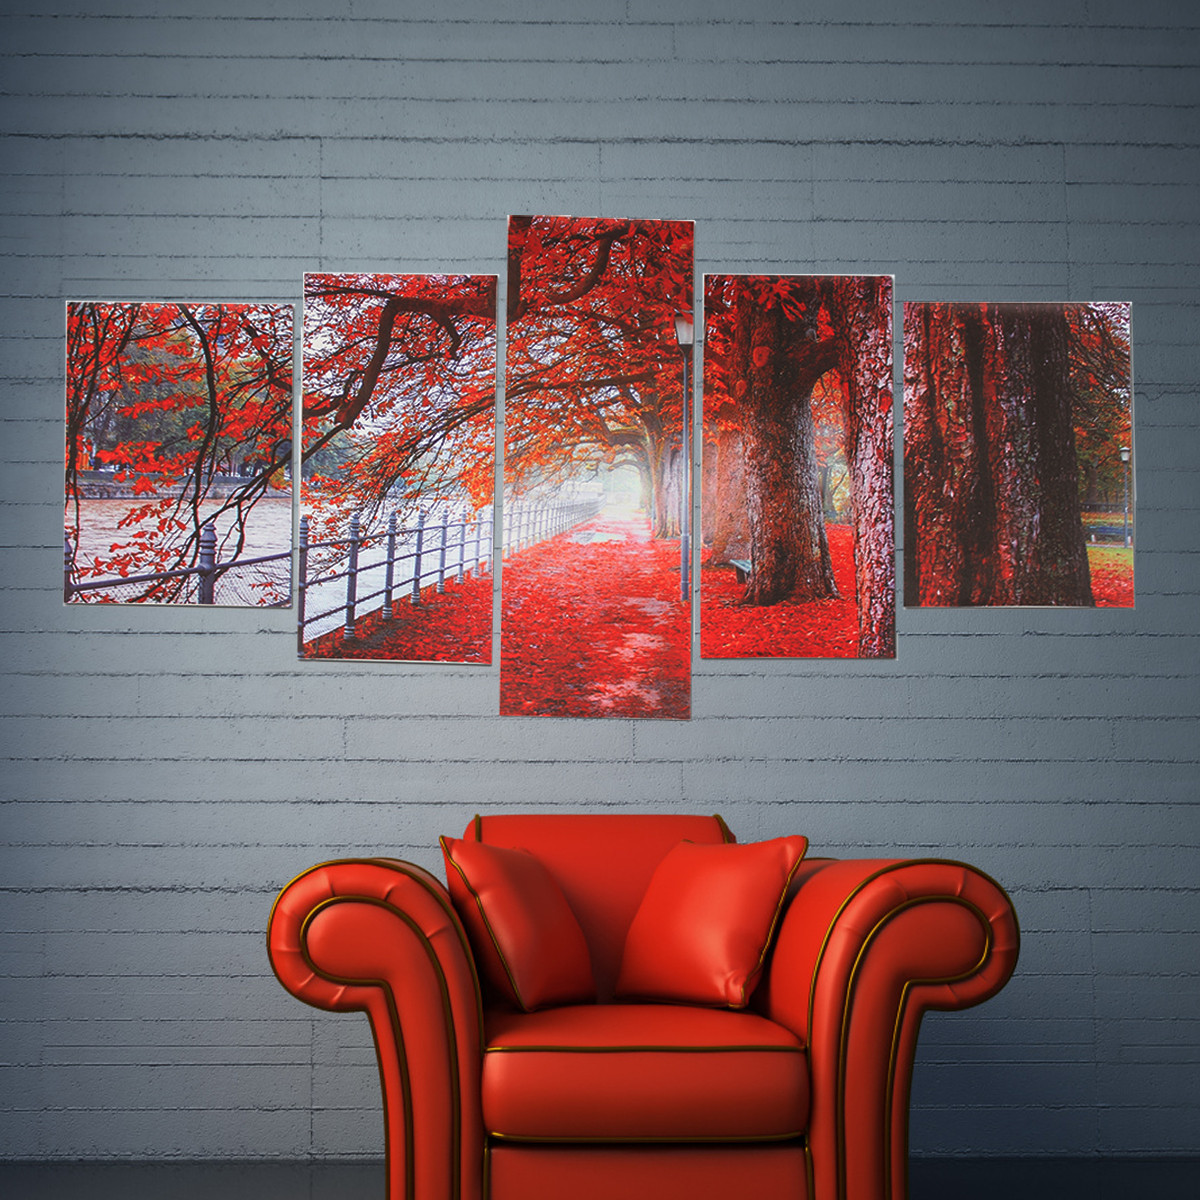 5Pcs-Red-Falling-Leaves-Canvas-Painting-Autumn-Tree-Wall-Decorative-Print-Art-Pictures-Unframed-Wall-1809936-4